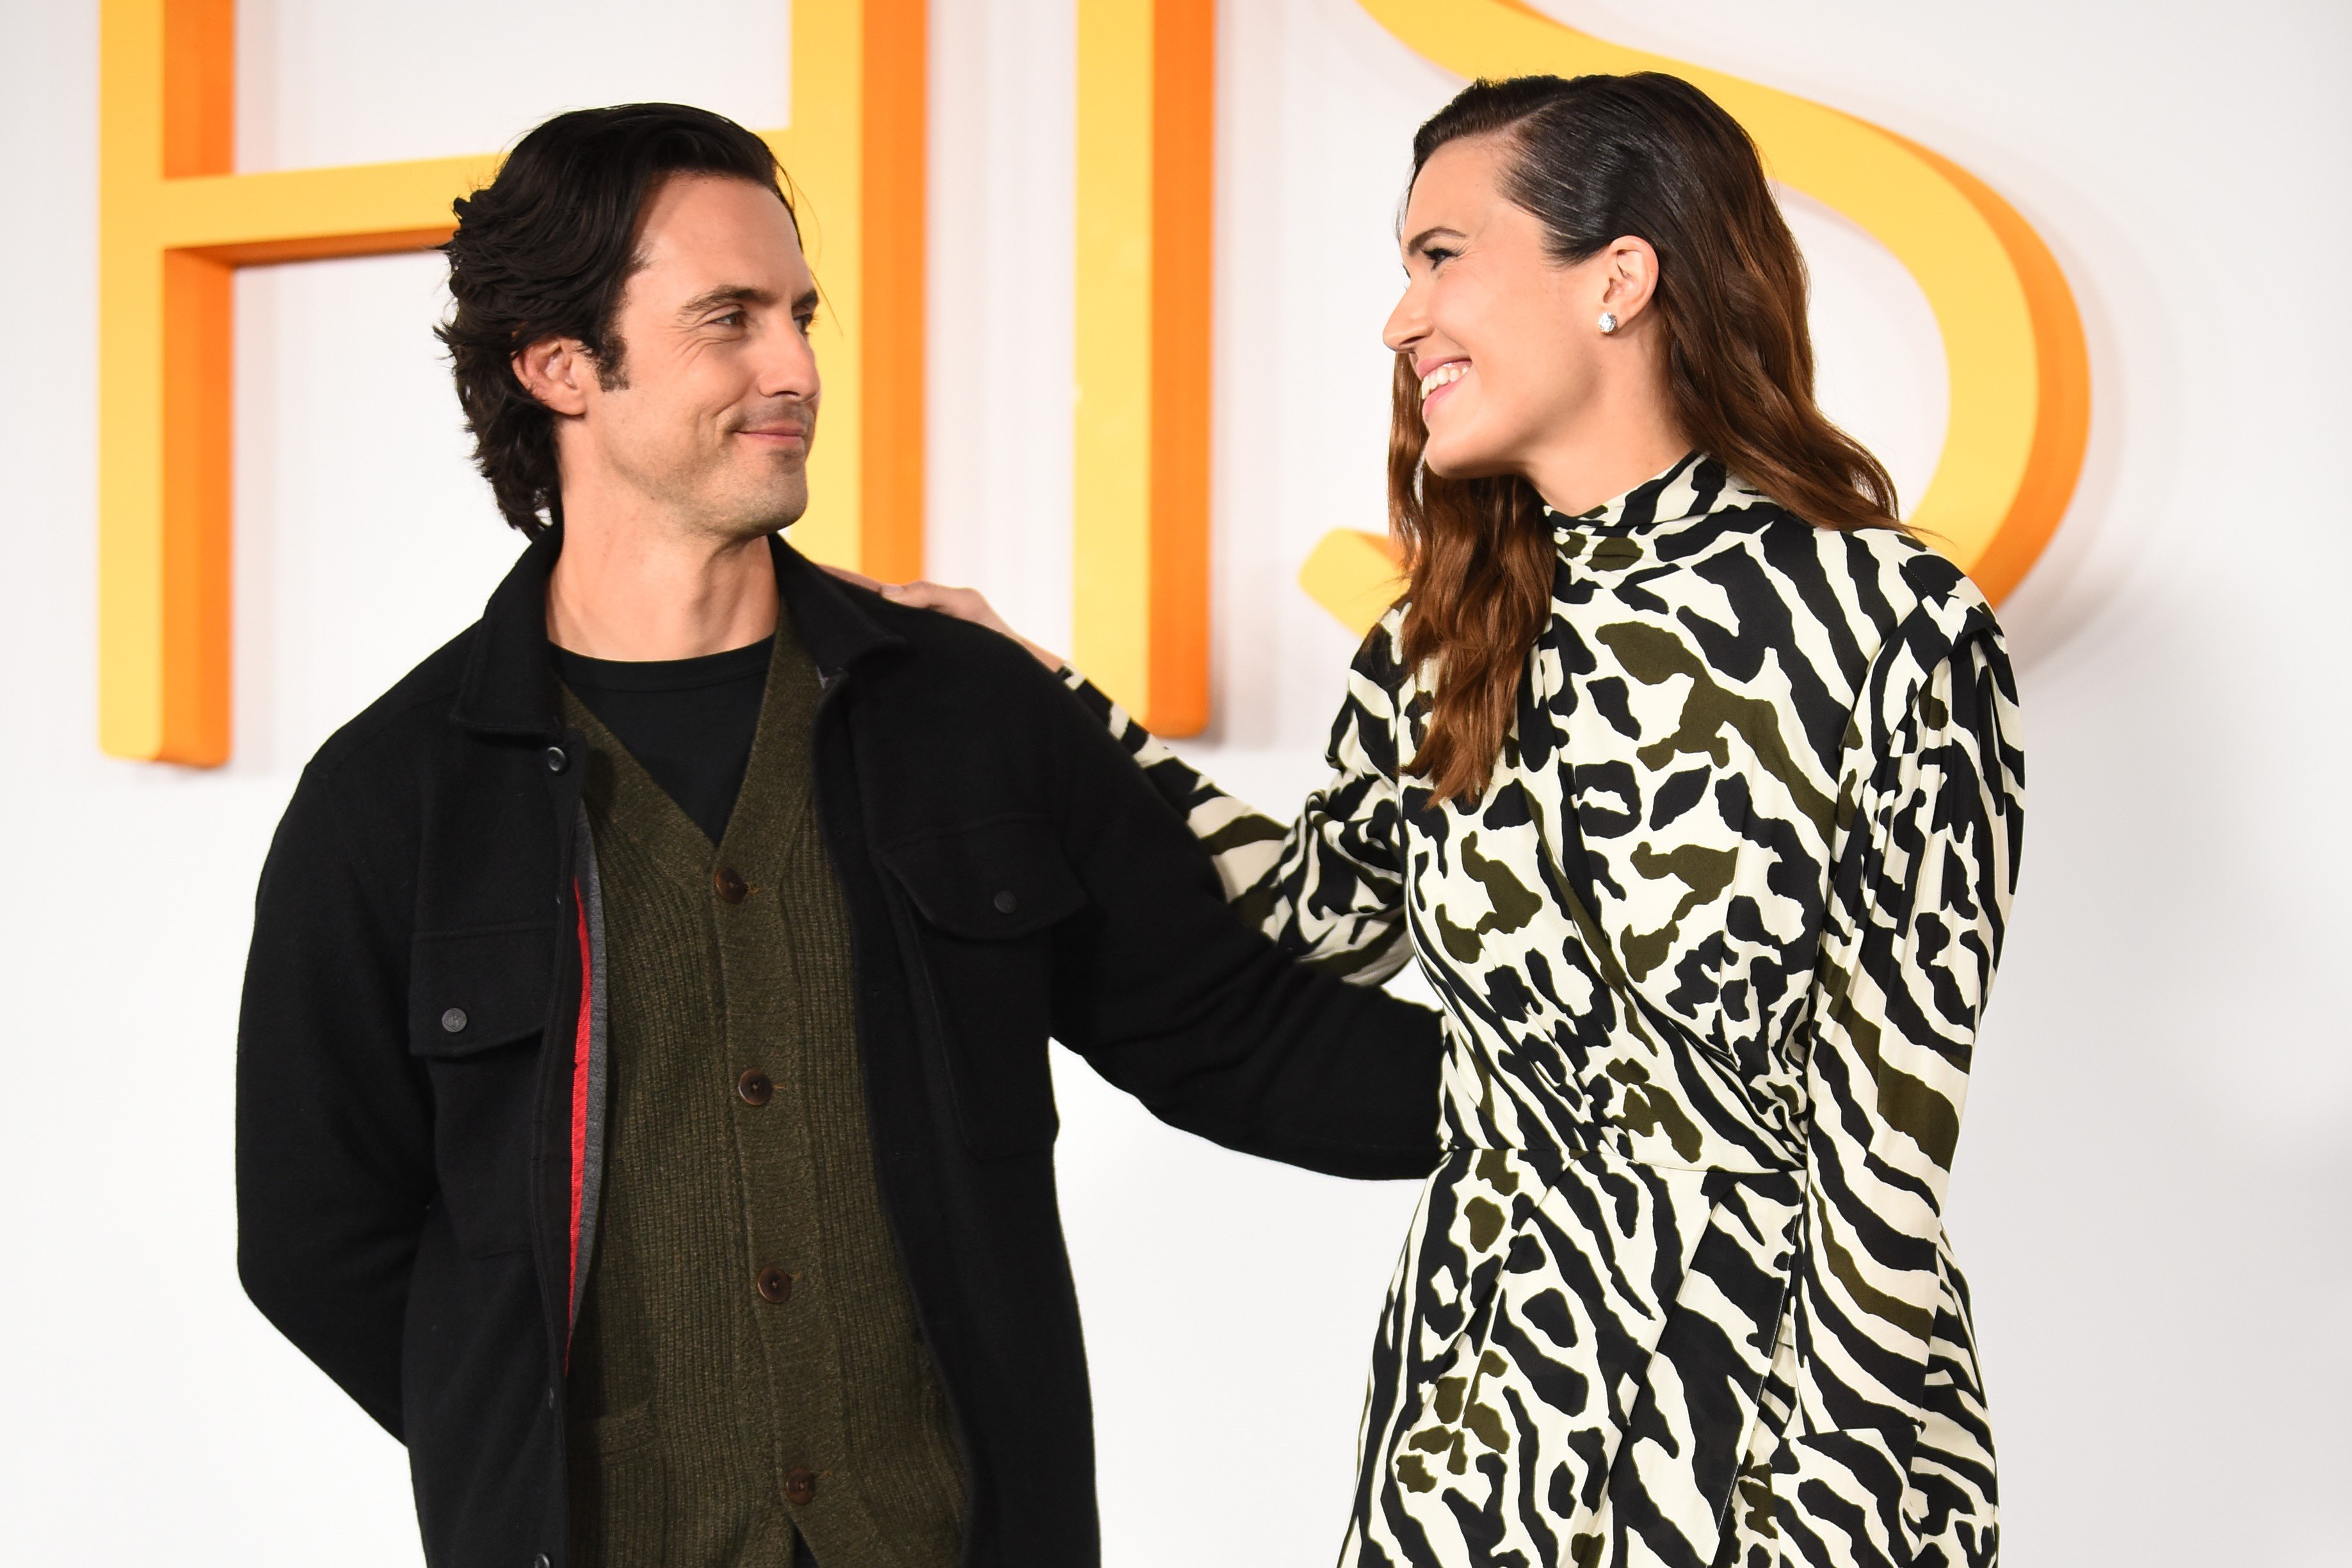 'This Is Us' stars Milo Ventimiglia and Mandy Moore pose for pictures together on the red carpet. Ventimiglia wears a black jacket over a dark green cardigan over a black t-shirt. Moore wears a long-sleeved black and white zebra print dress.